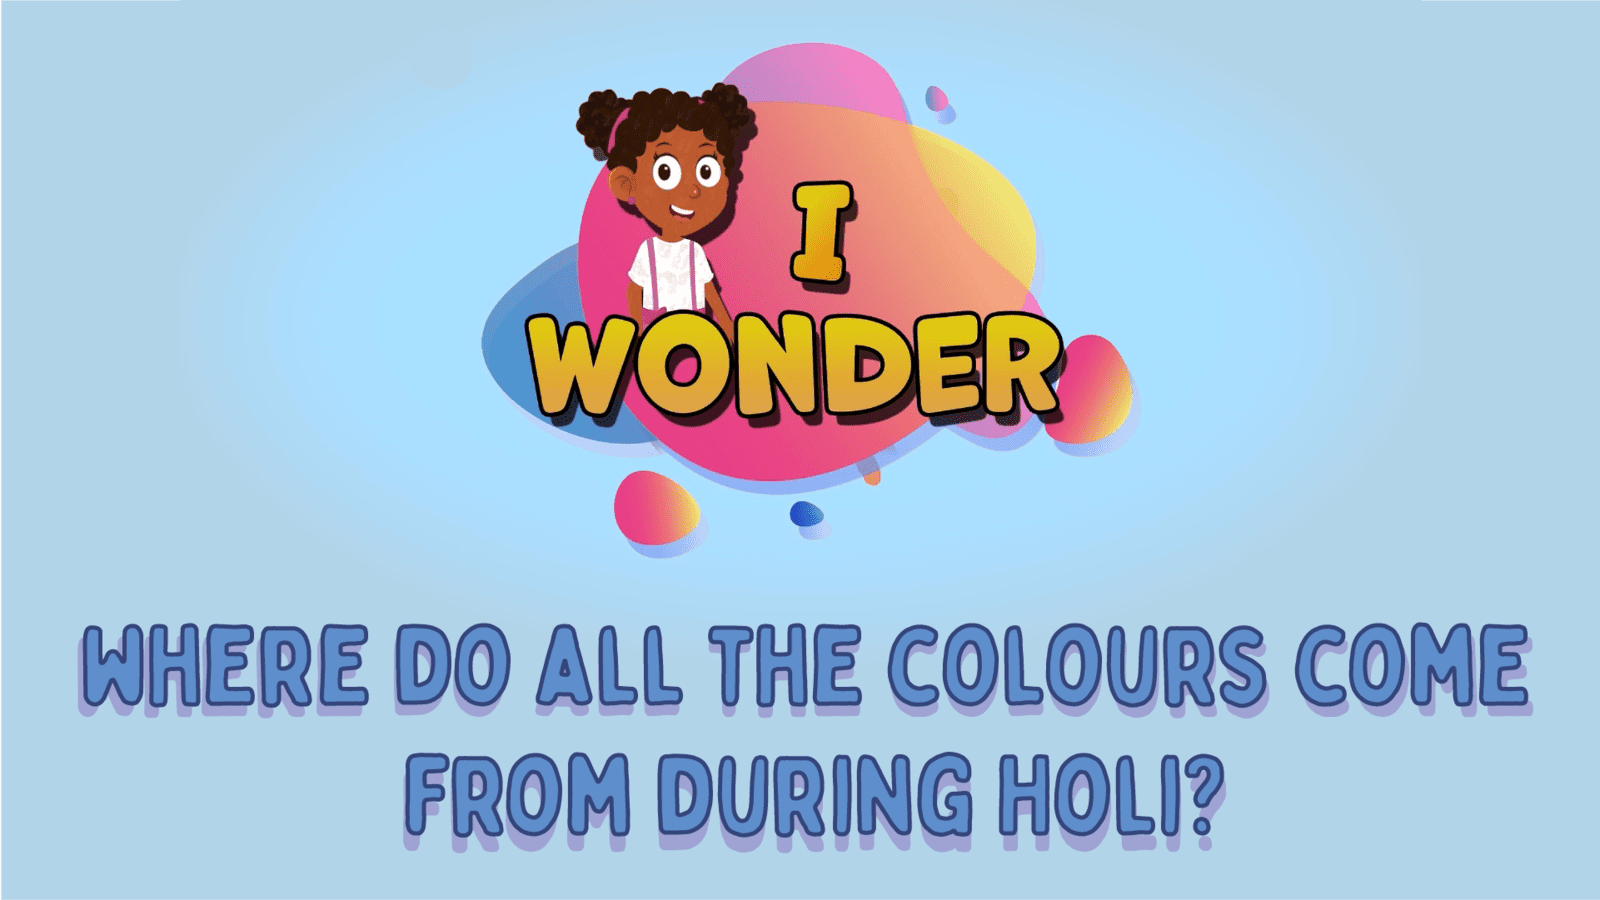 Where Do All The Colours Come From During Holi?